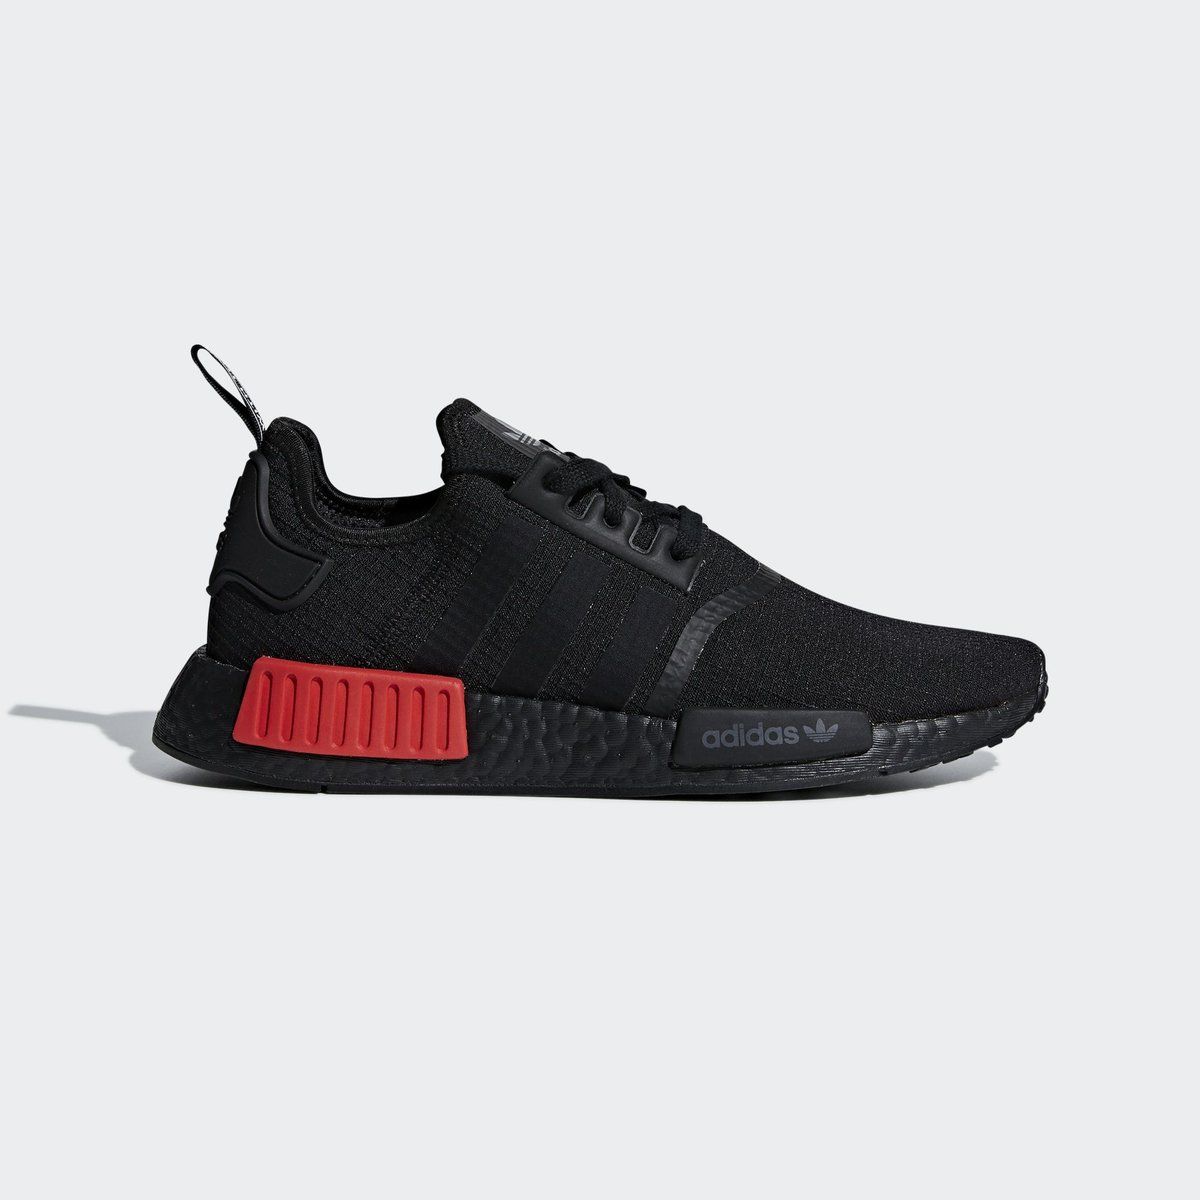 banjo Cadera Medicina Forense KicksFinder on Twitter: "ICYMI: The adidas NMD R1 Ripstop Pack is available  at the following retailers: Finish Line: https://t.co/UsgbgZQe7N SNS:  https://t.co/wxFazreNca JD Sports: https://t.co/AoRAtxqkFs Offspring:  https://t.co/empGGP019y Size?: https ...